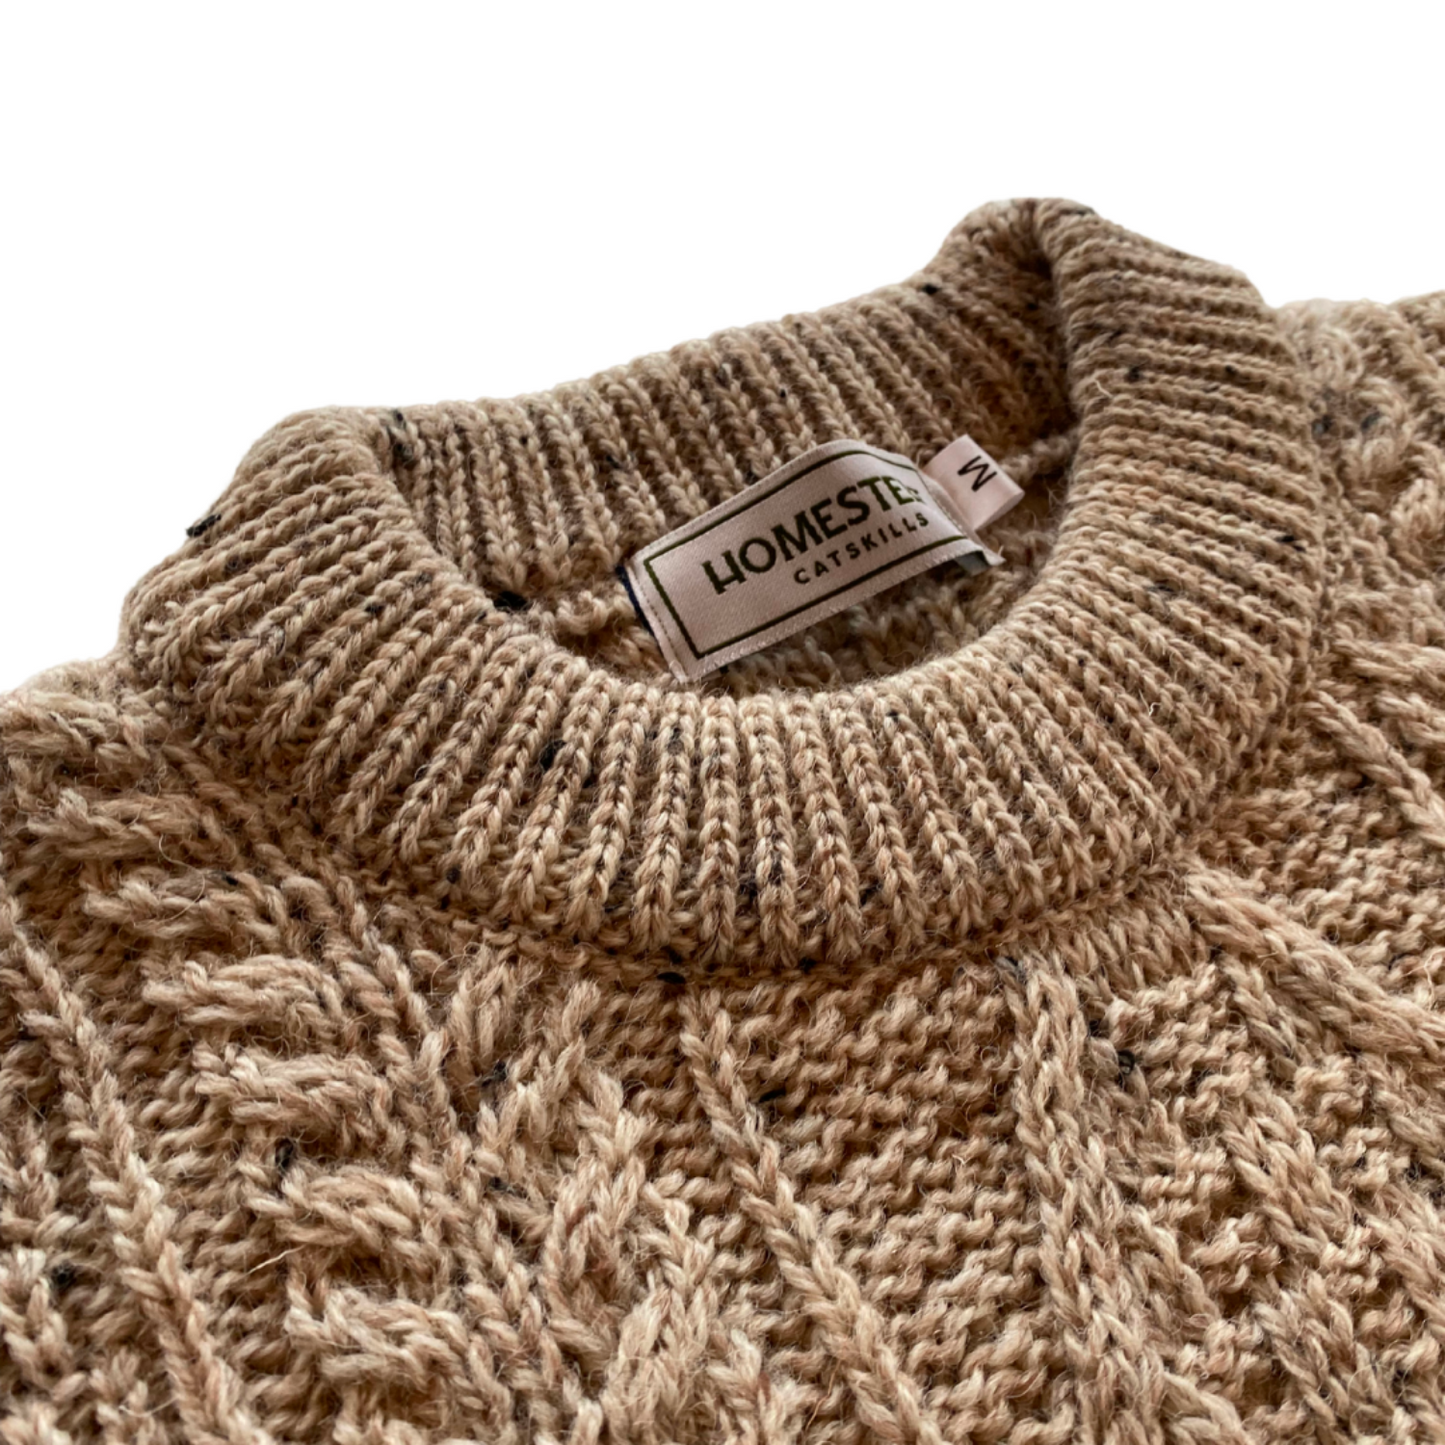 Homestedt British Wool Cable Knit Sweater - Oatmeal